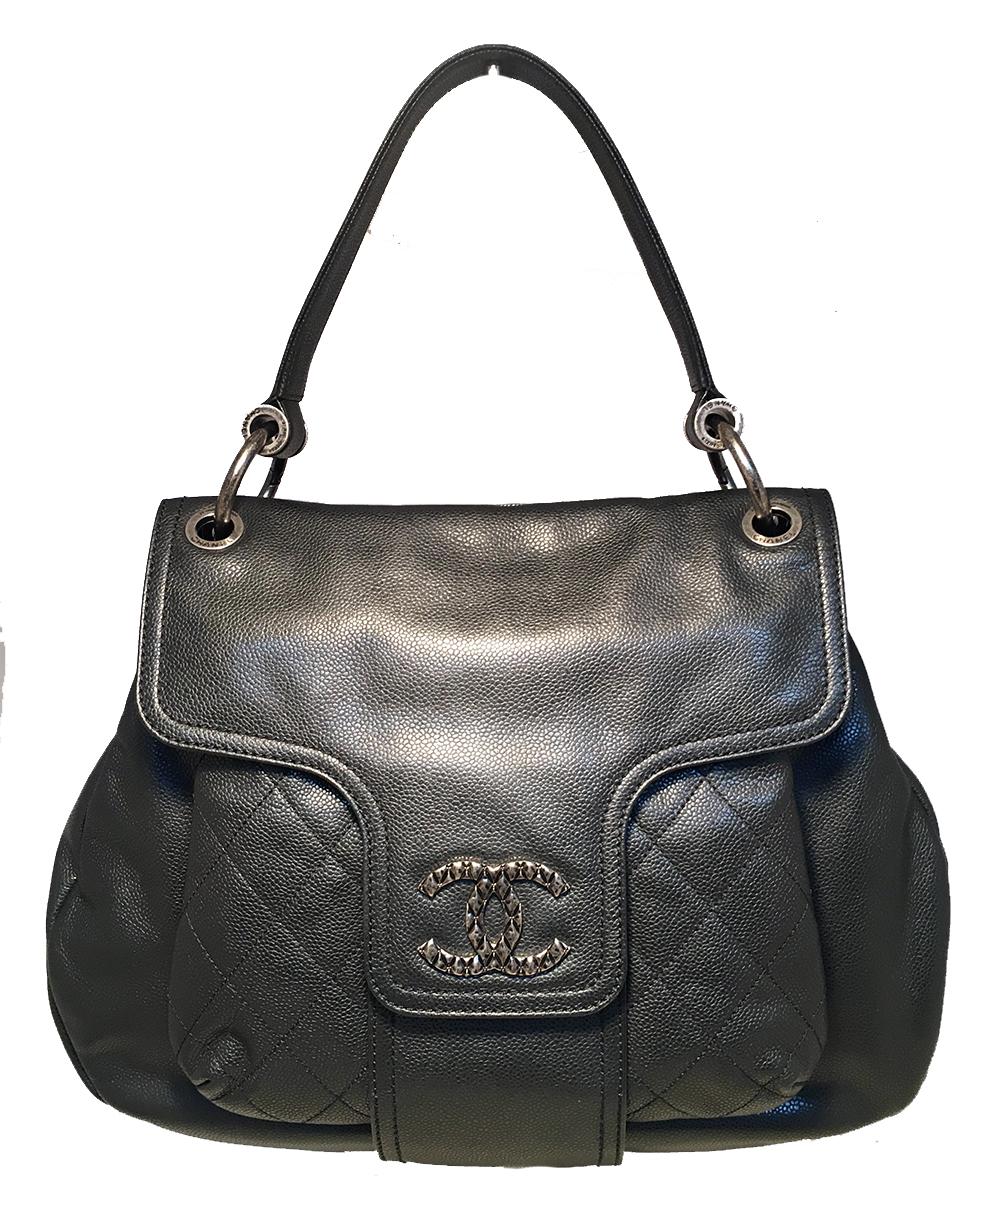 Chanel Black Leather Coco Rider Flap Bag in excellent condition. Black glazed caviar leather exterior trimmed with antiqued silver hardware. Unique double shoulder strap design features one full leather strap and one longer woven chain and leather